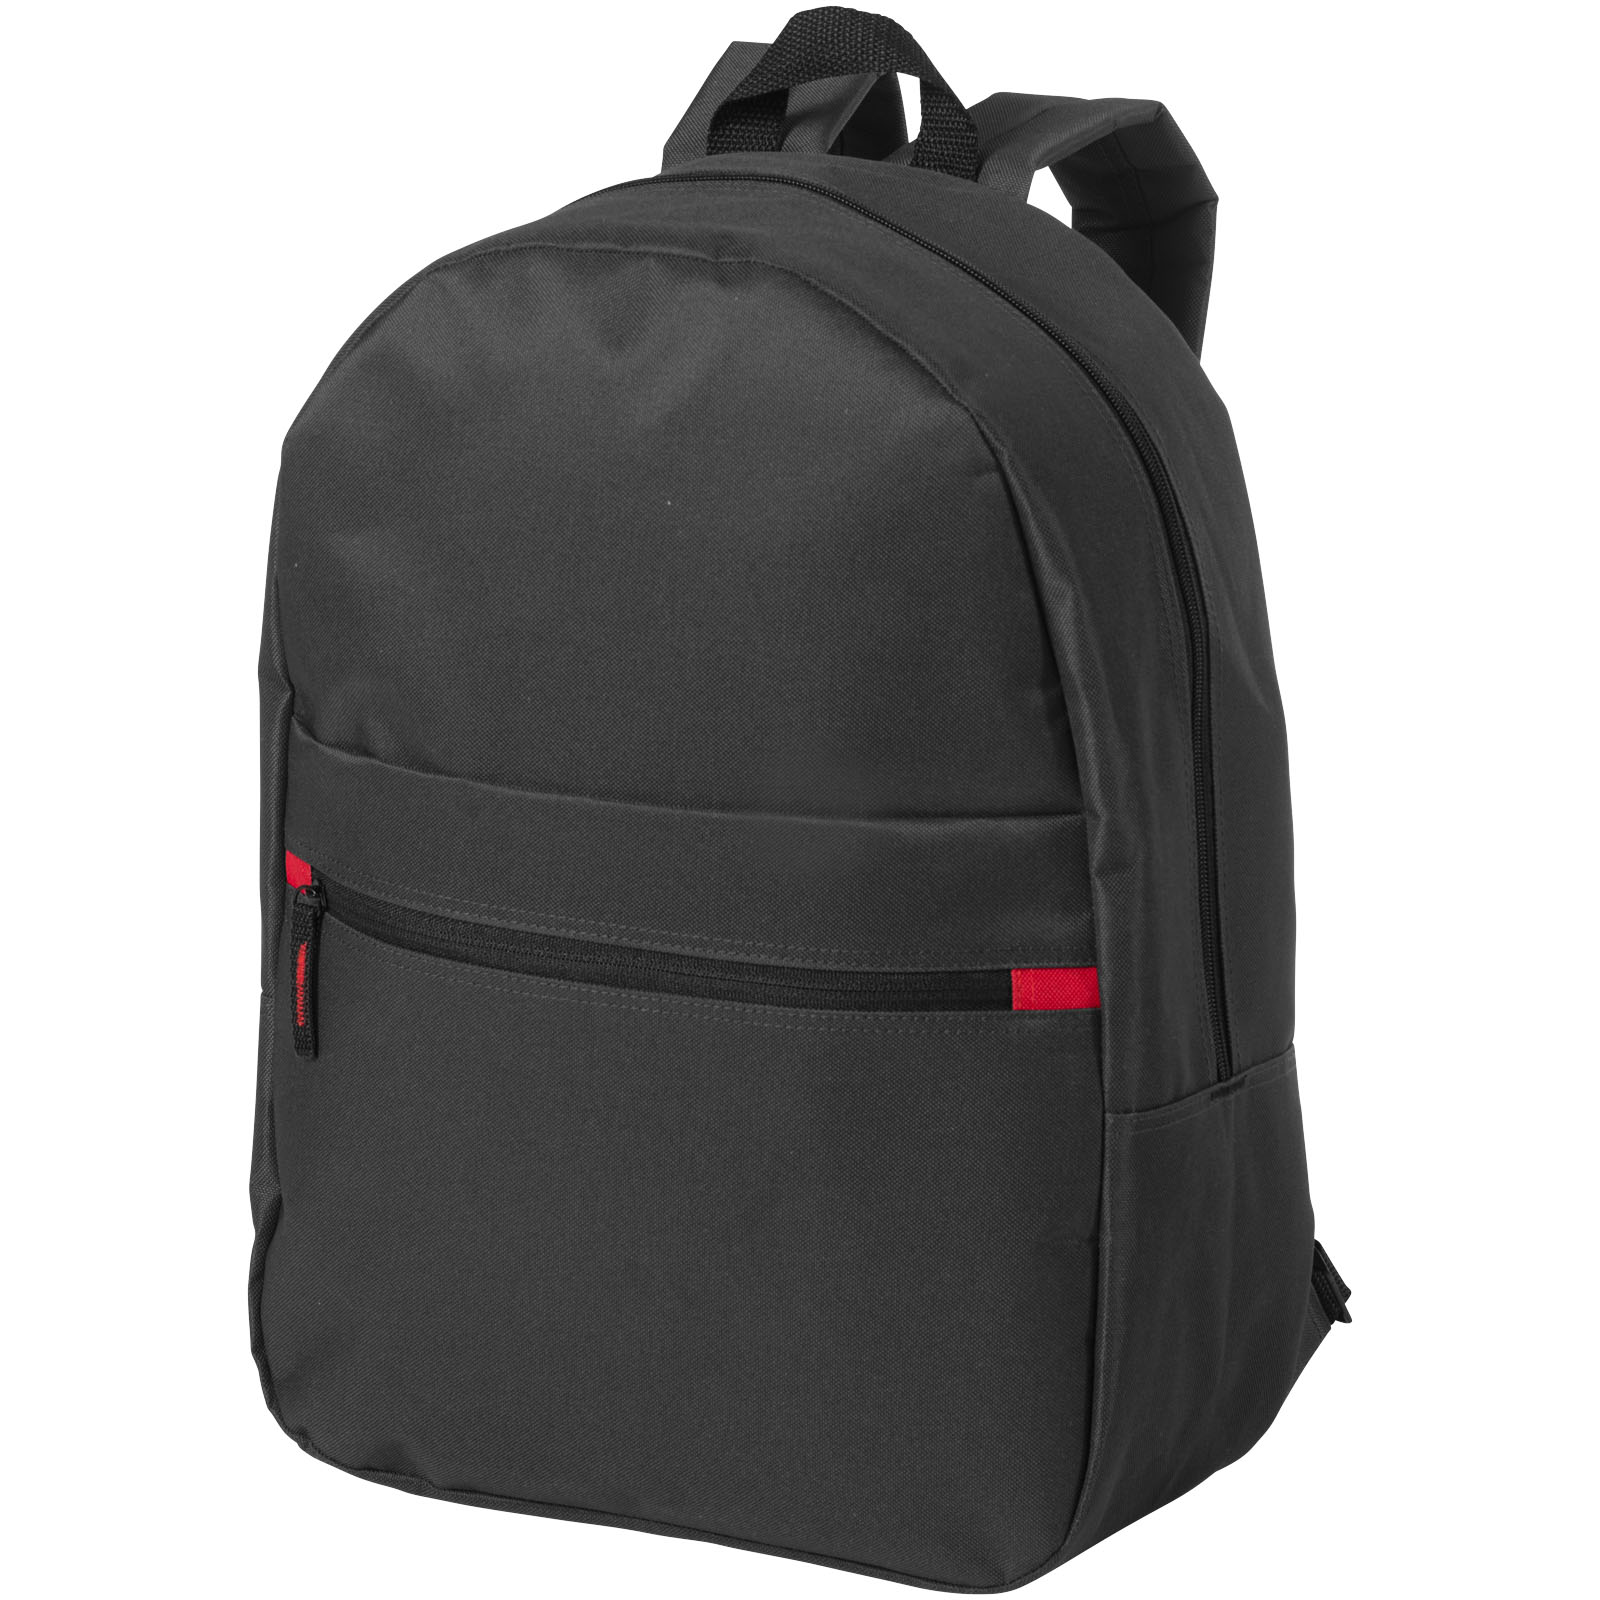 Bags - Vancouver backpack 23L